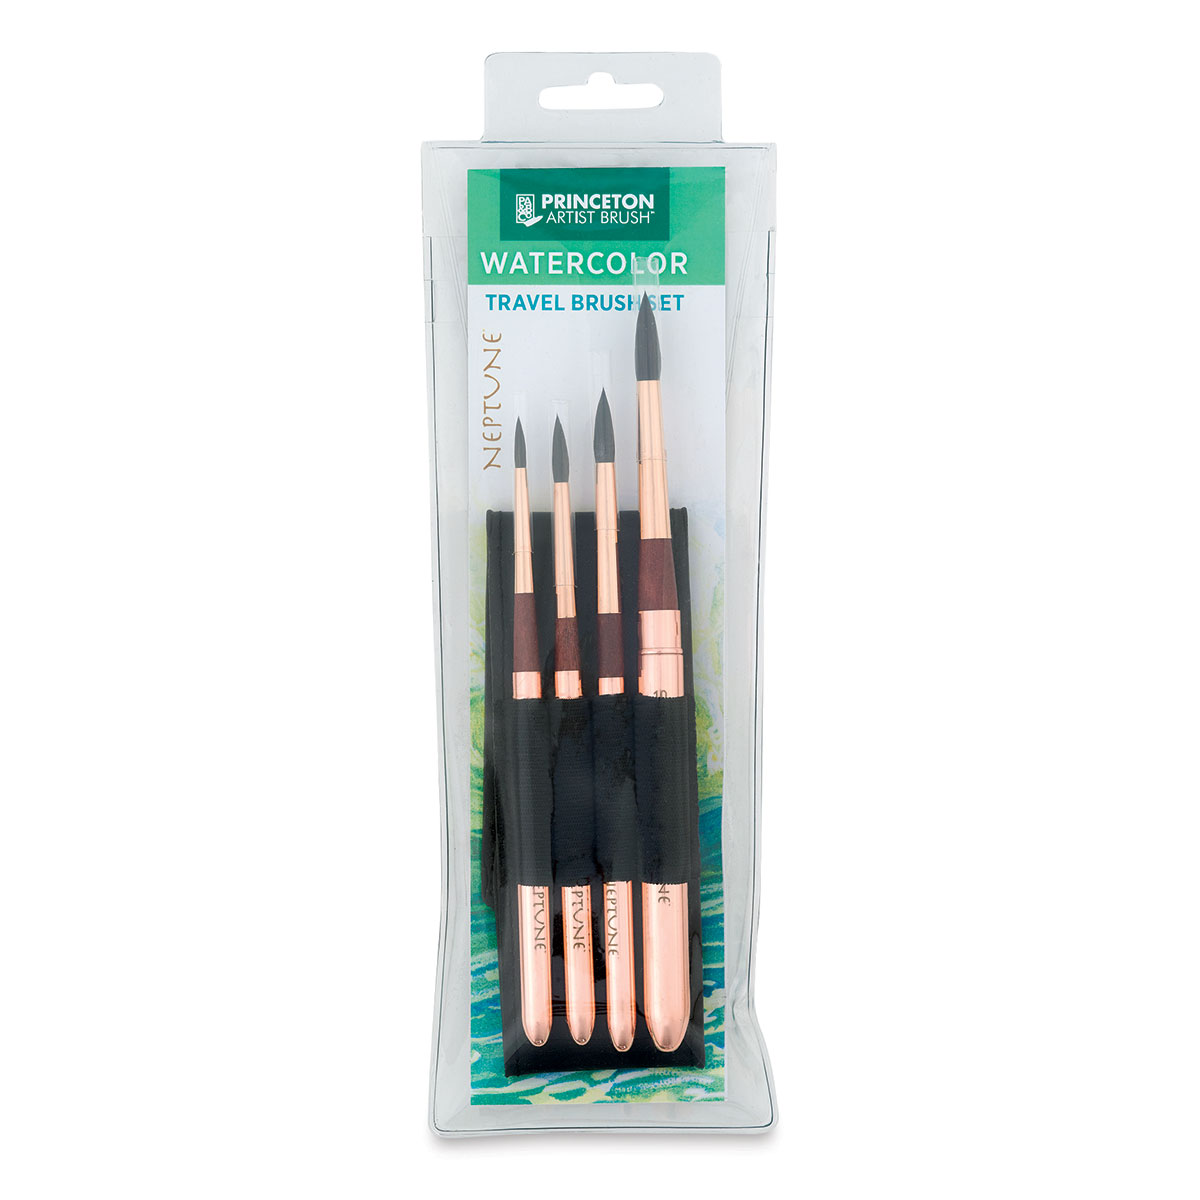 Princeton Artist Brush, Neptune Series 4750, Synthetic Squirrel Watercolor  Paint Brush, 4 Piece Professional Travel Set, Size Round 4, 6, 8, 10